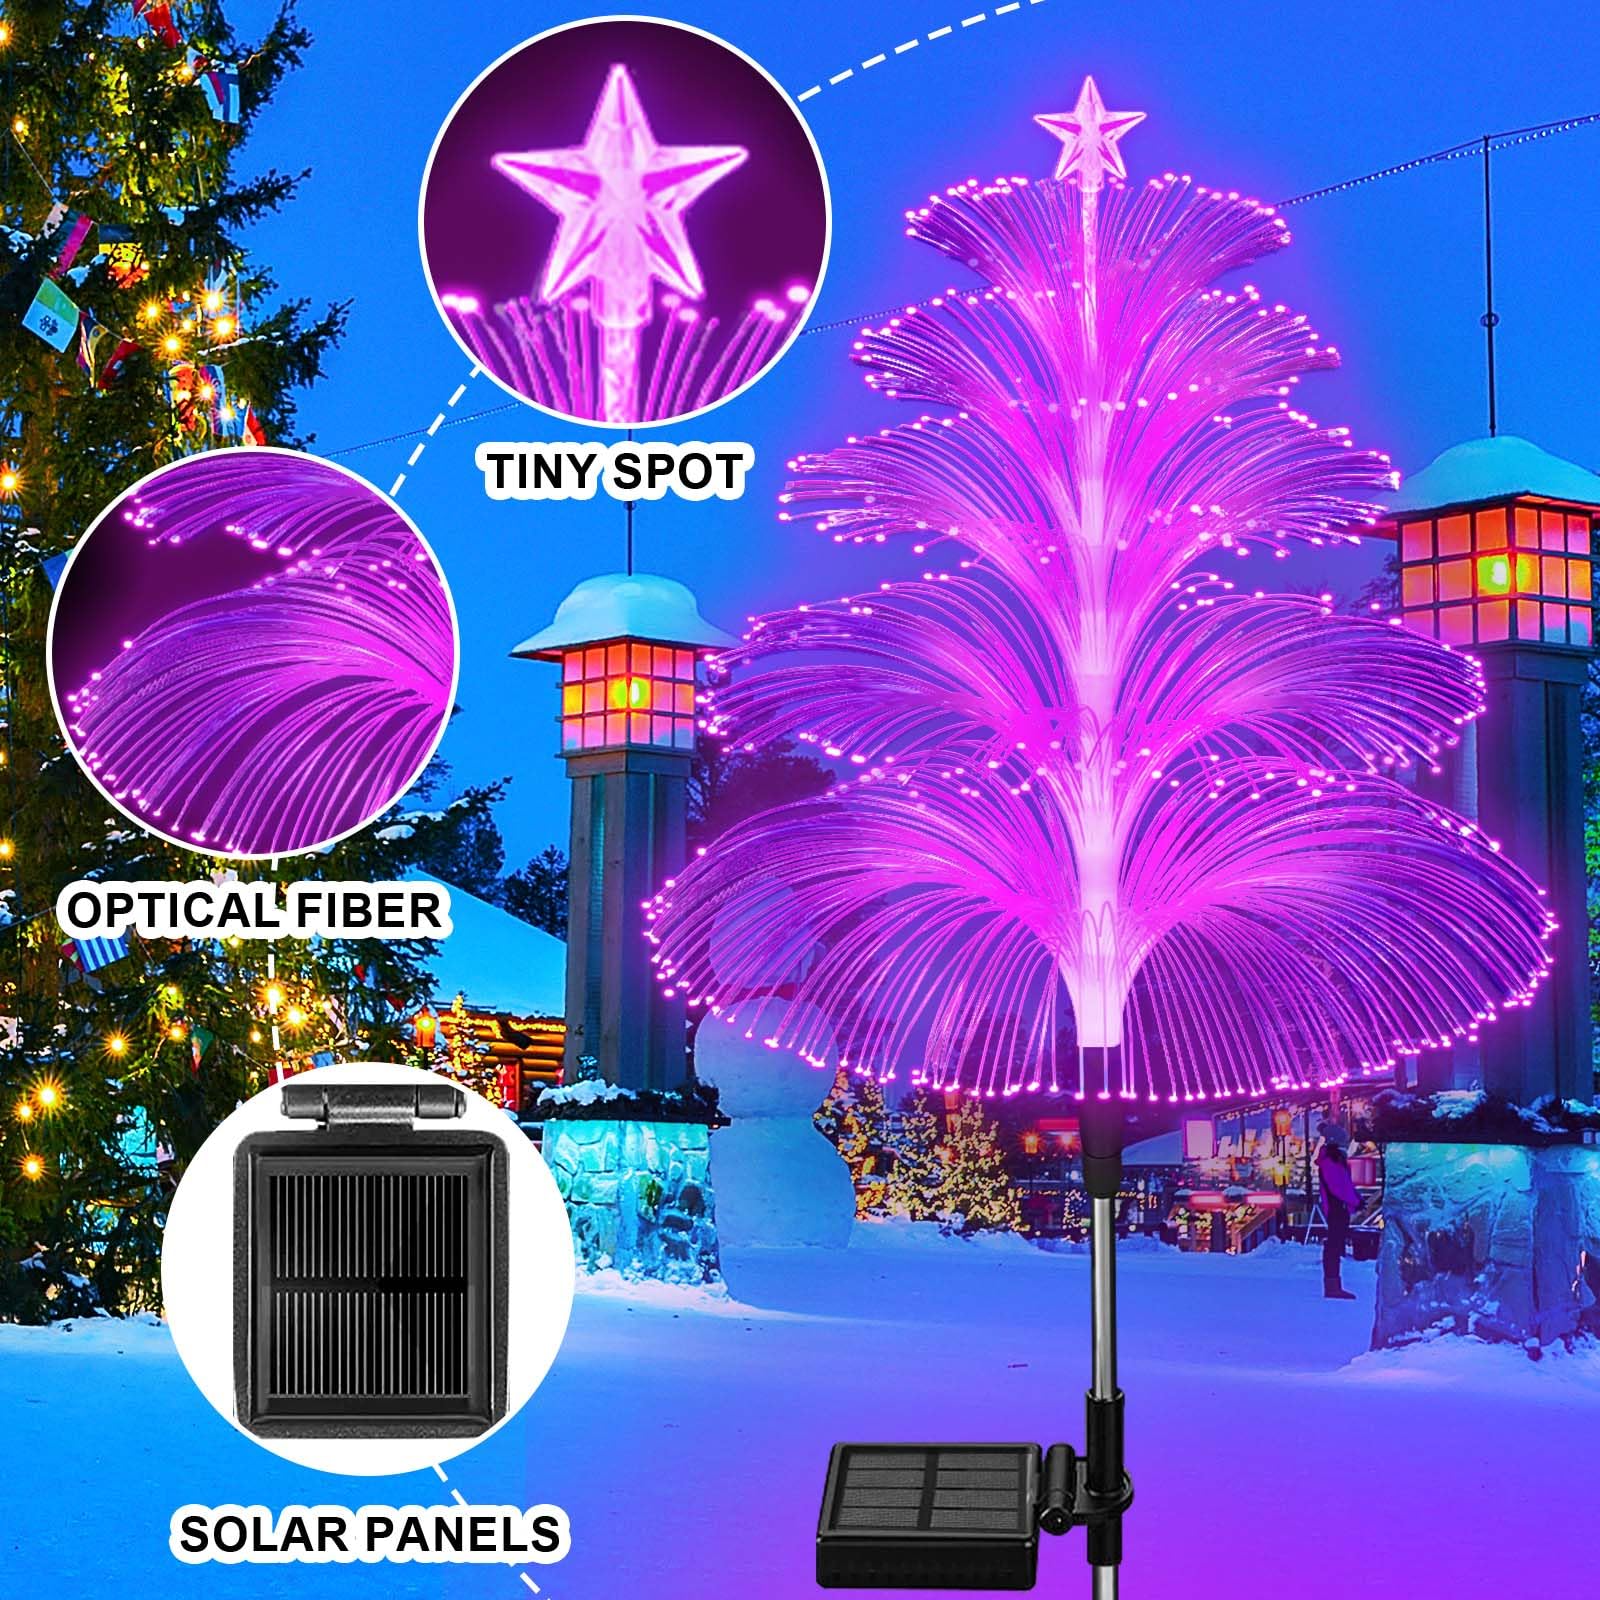 7 Color Changing Christmas Firework Lights - Christmas Tree Solar Garden Light With Multi, Colored Change -  Intelligent Light Control